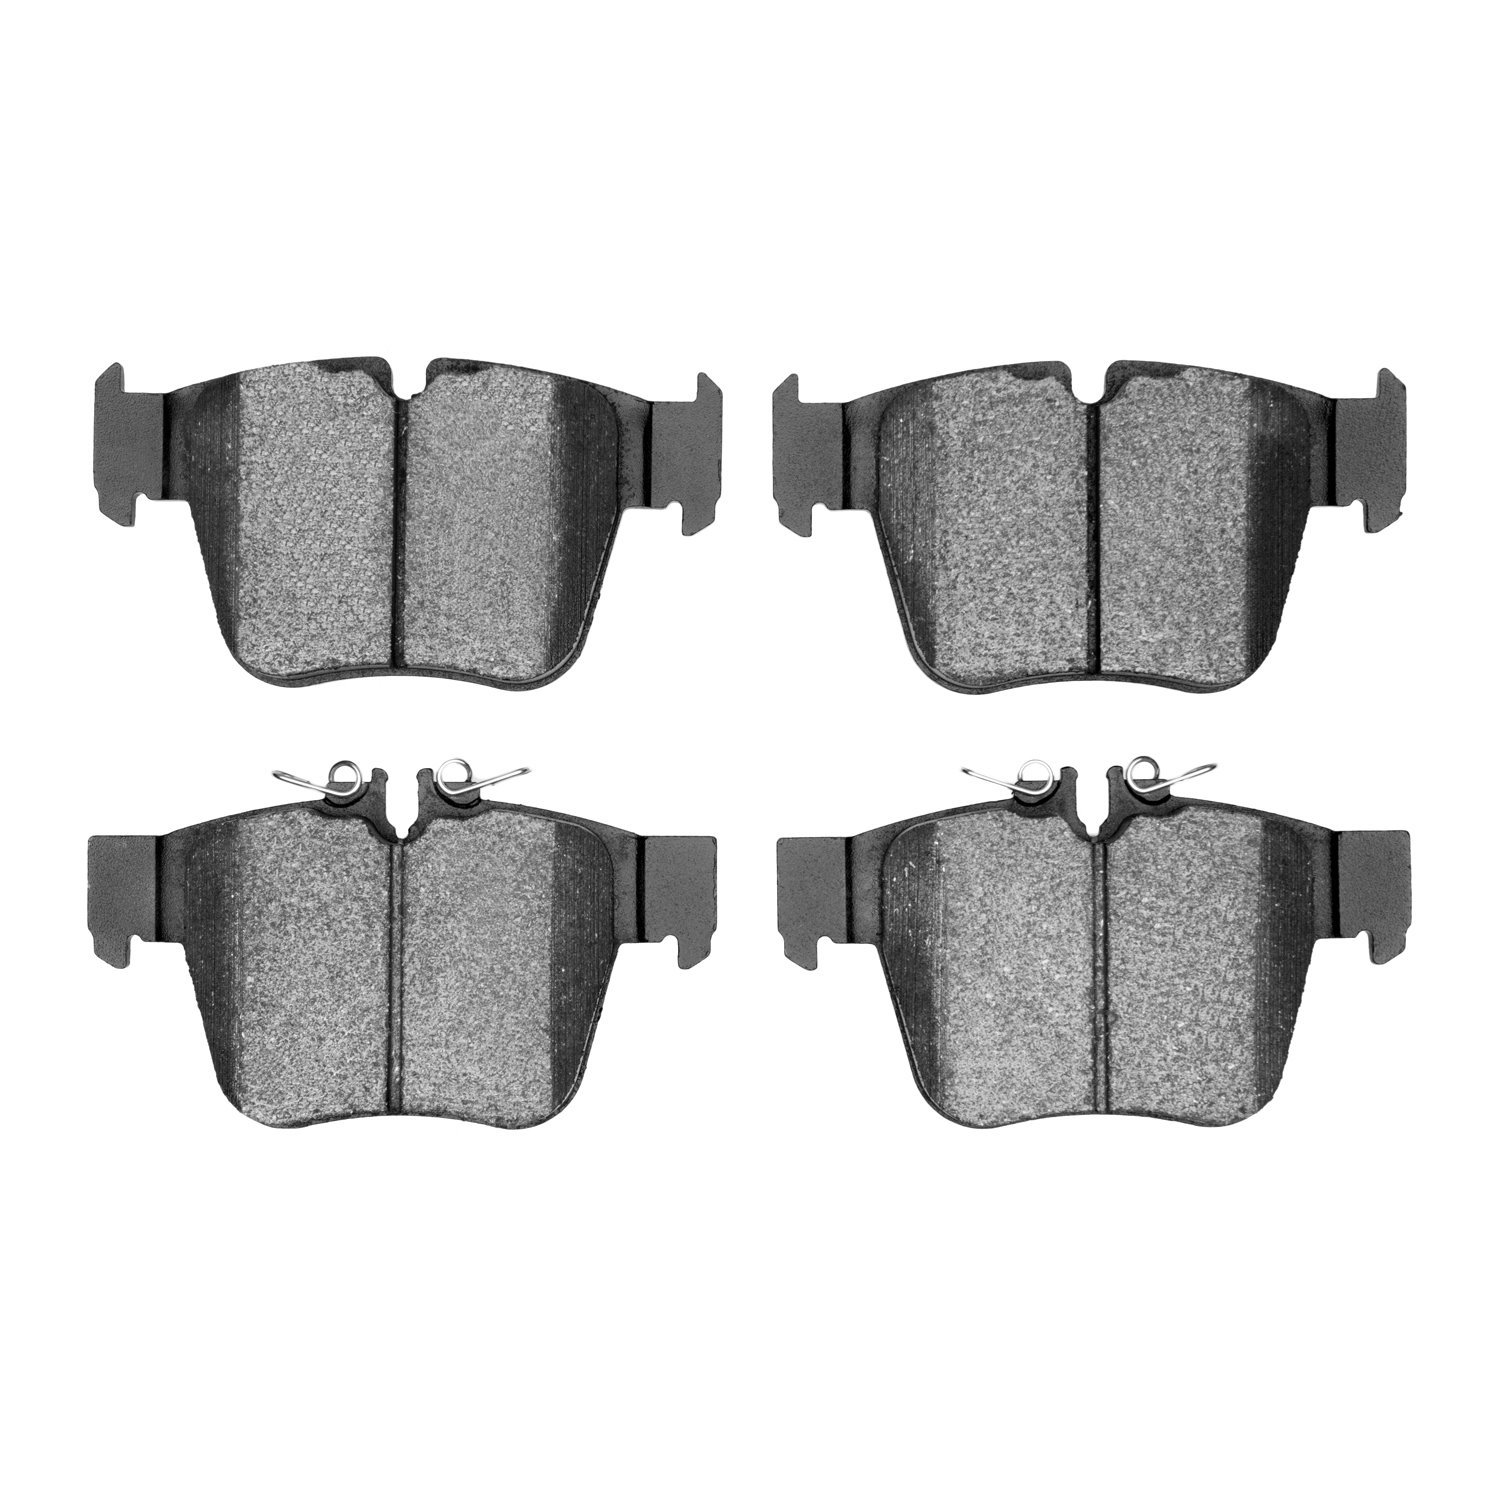 1310-1872-00 3000-Series Ceramic Brake Pads, Fits Select Mercedes-Benz, Position: Rear